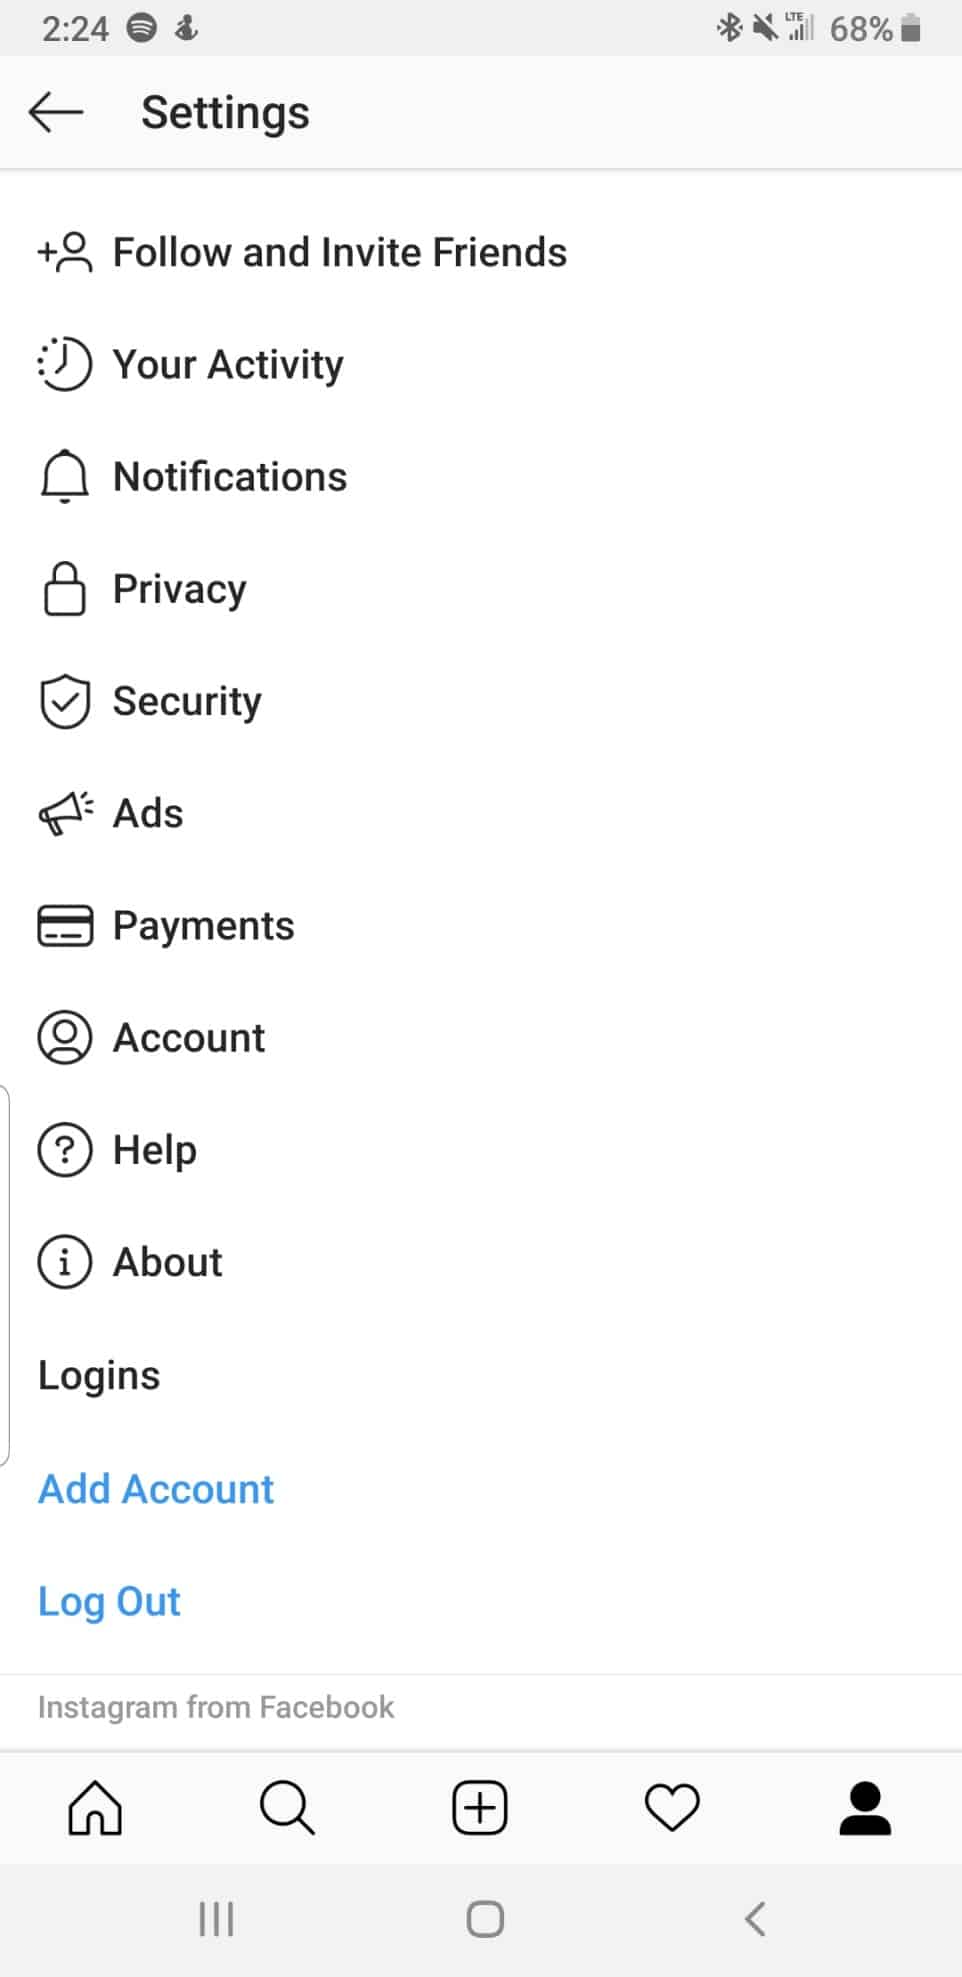 select “Privacy.”